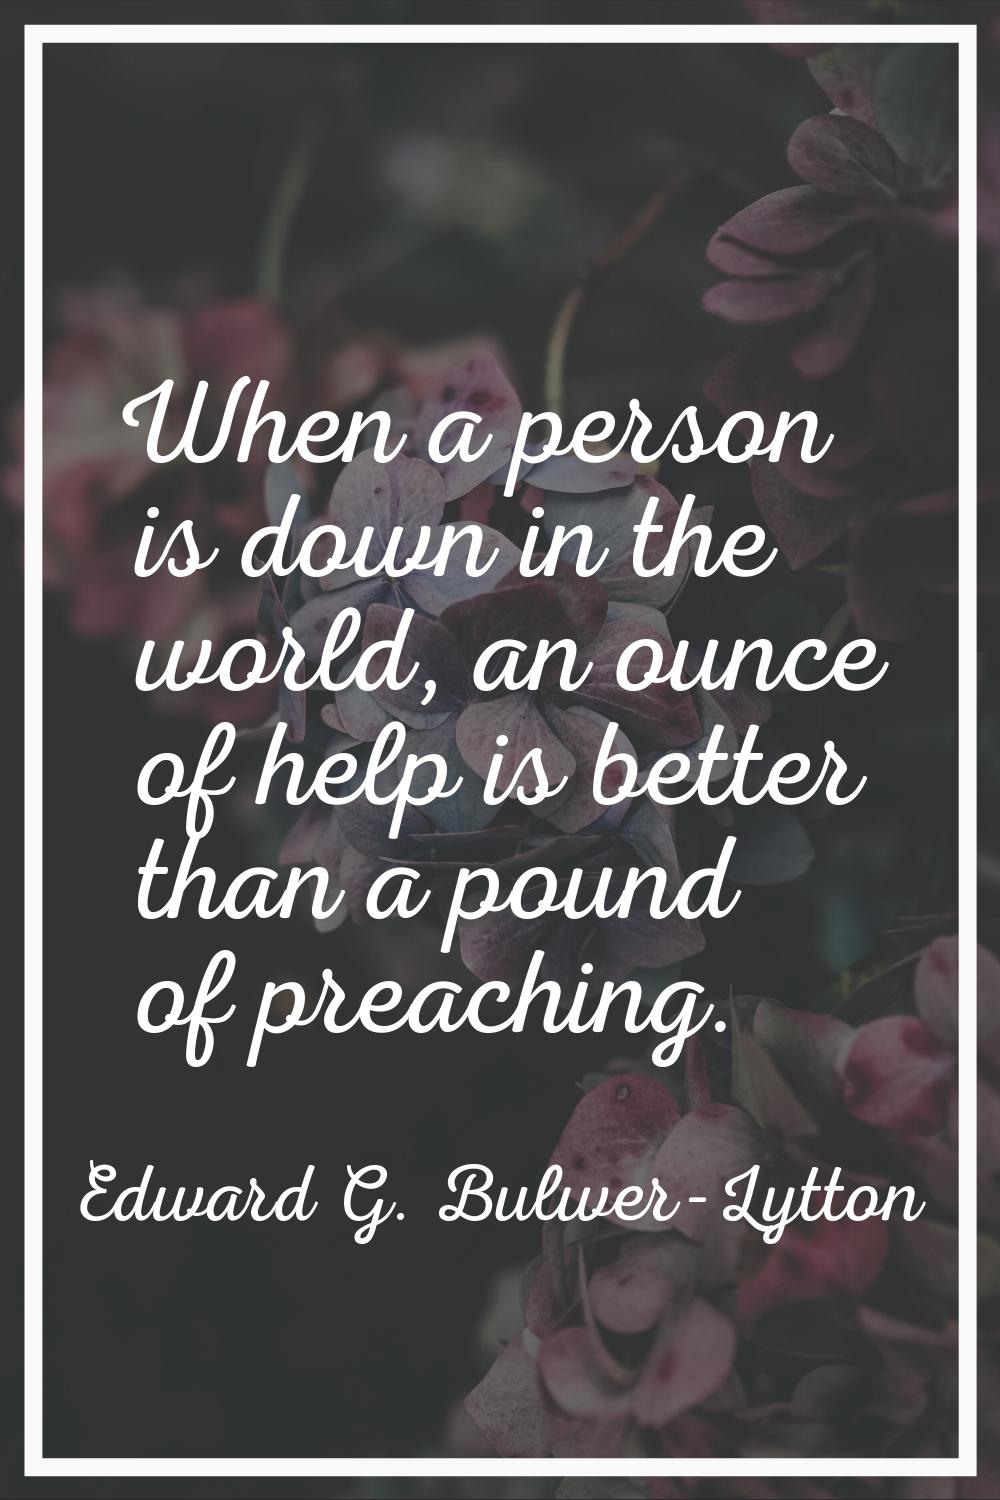 When a person is down in the world, an ounce of help is better than a pound of preaching.